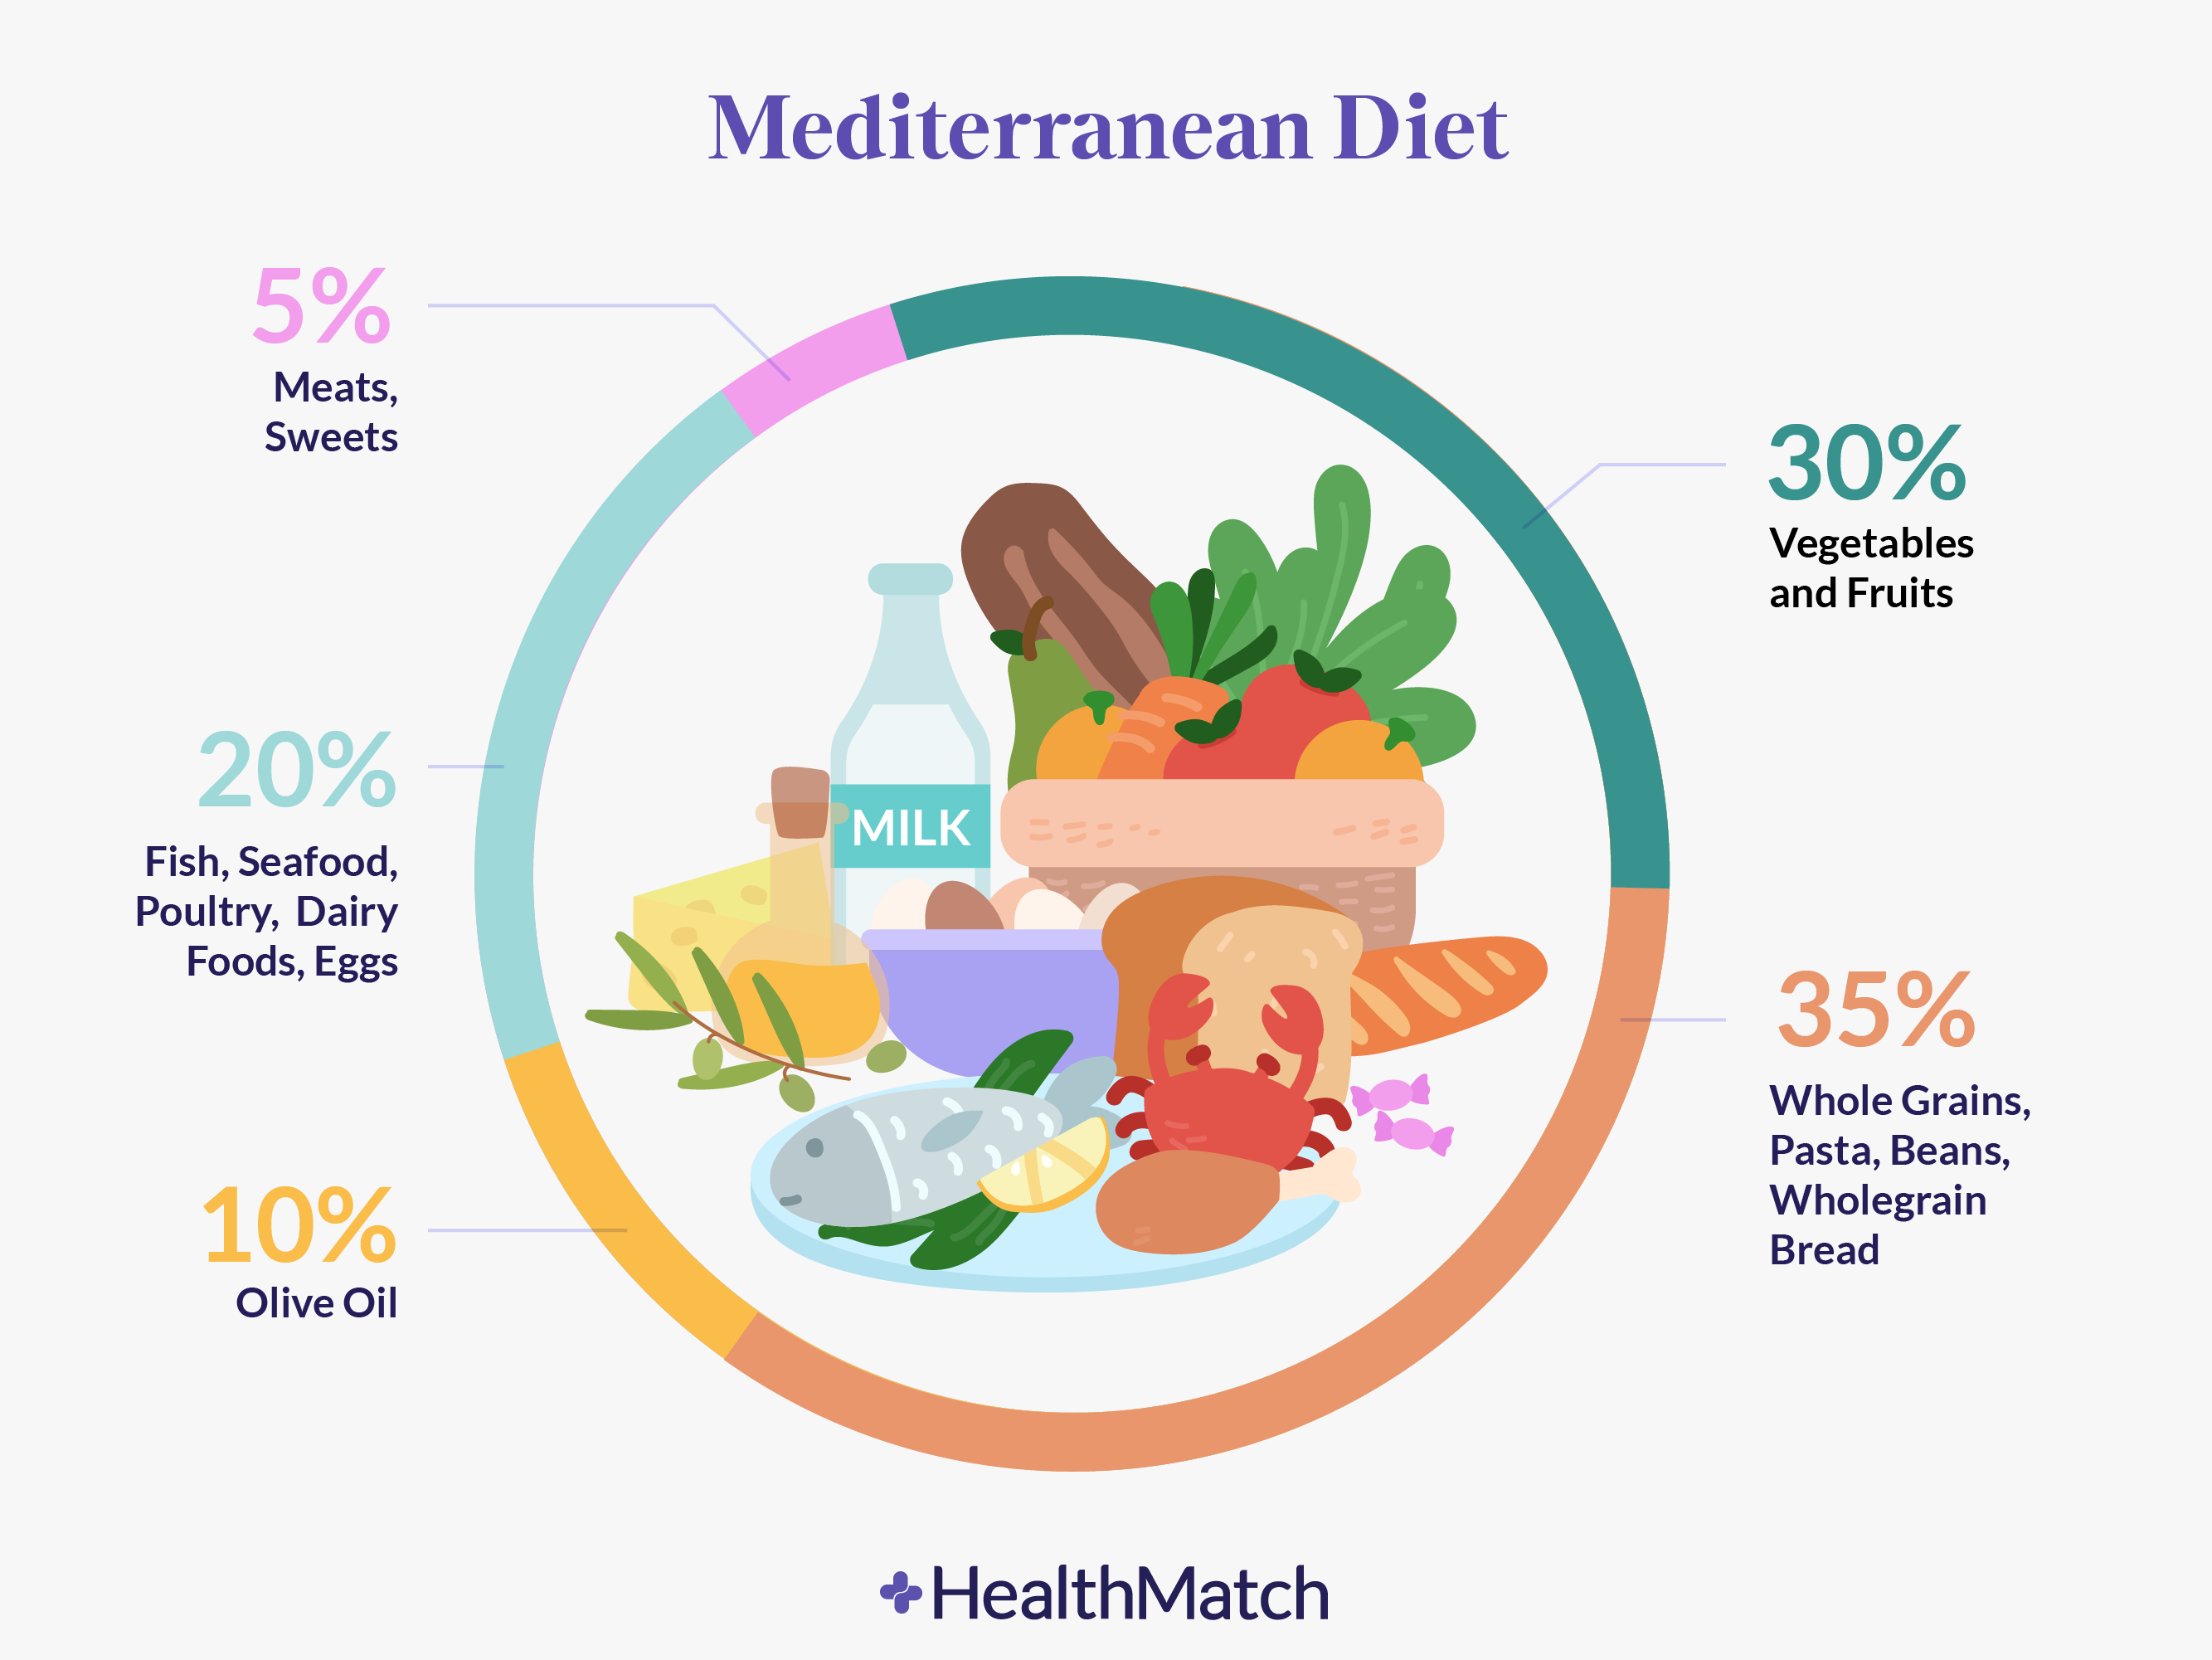 Mediterranean diet and reduced processed foods